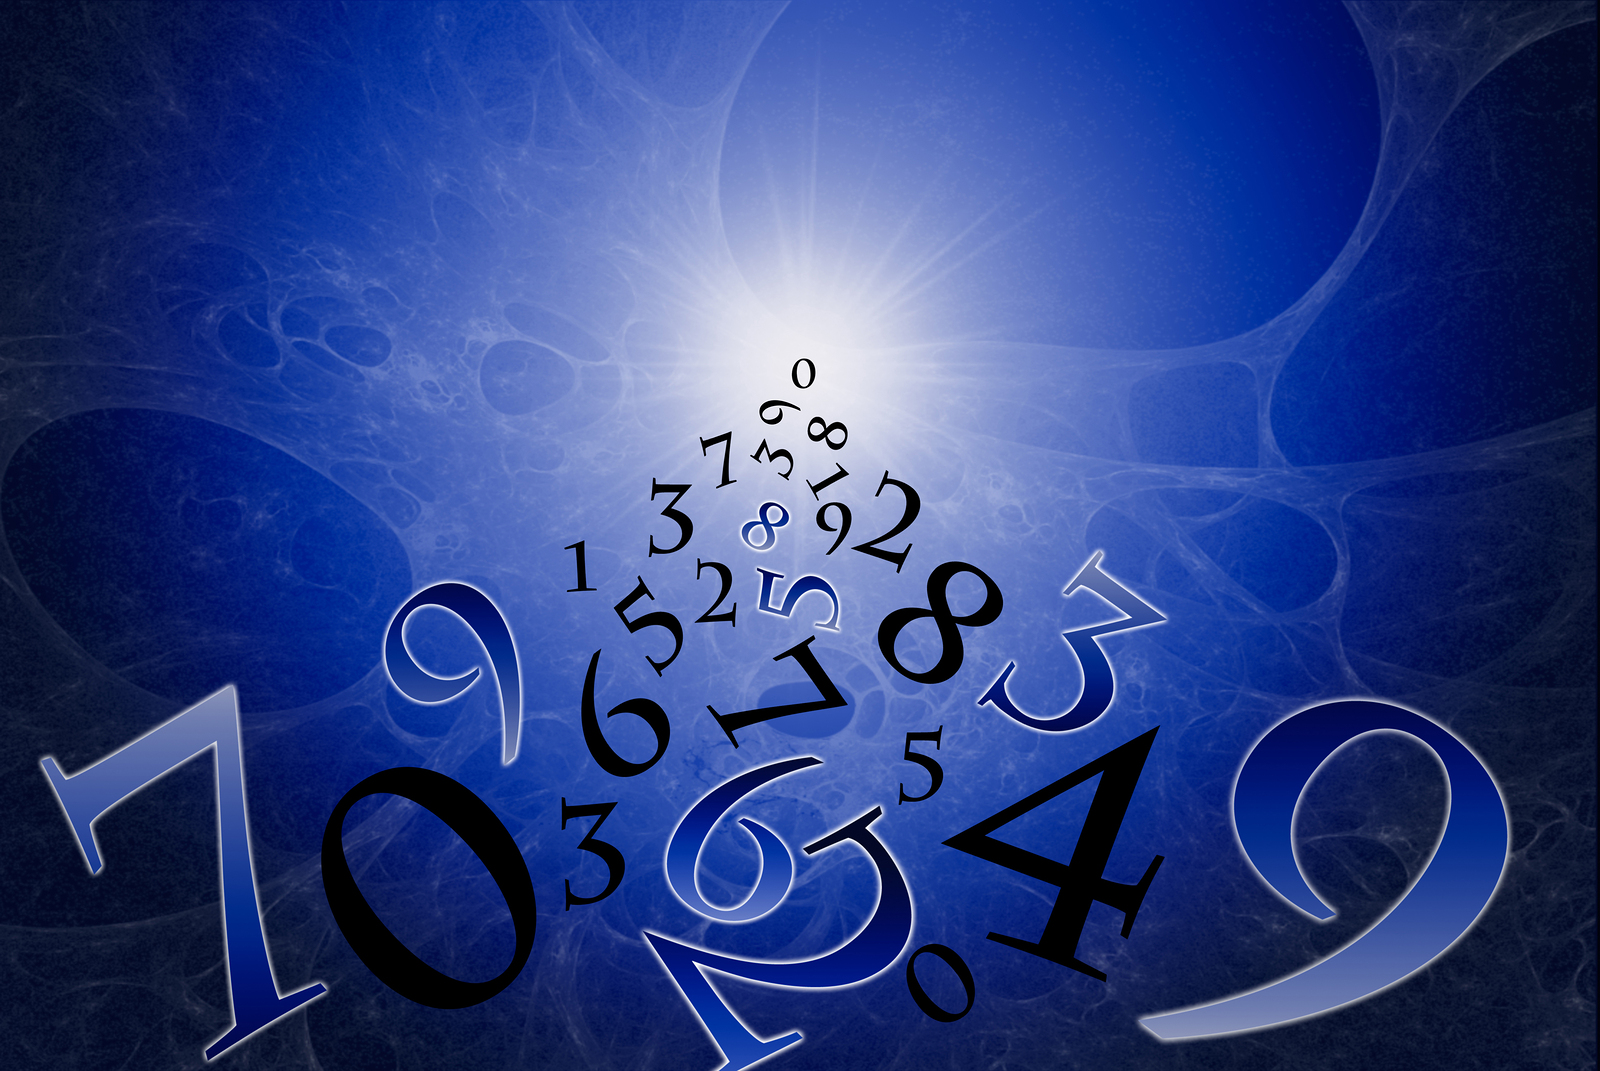 Light News Numerology It’s All In The Numbers!